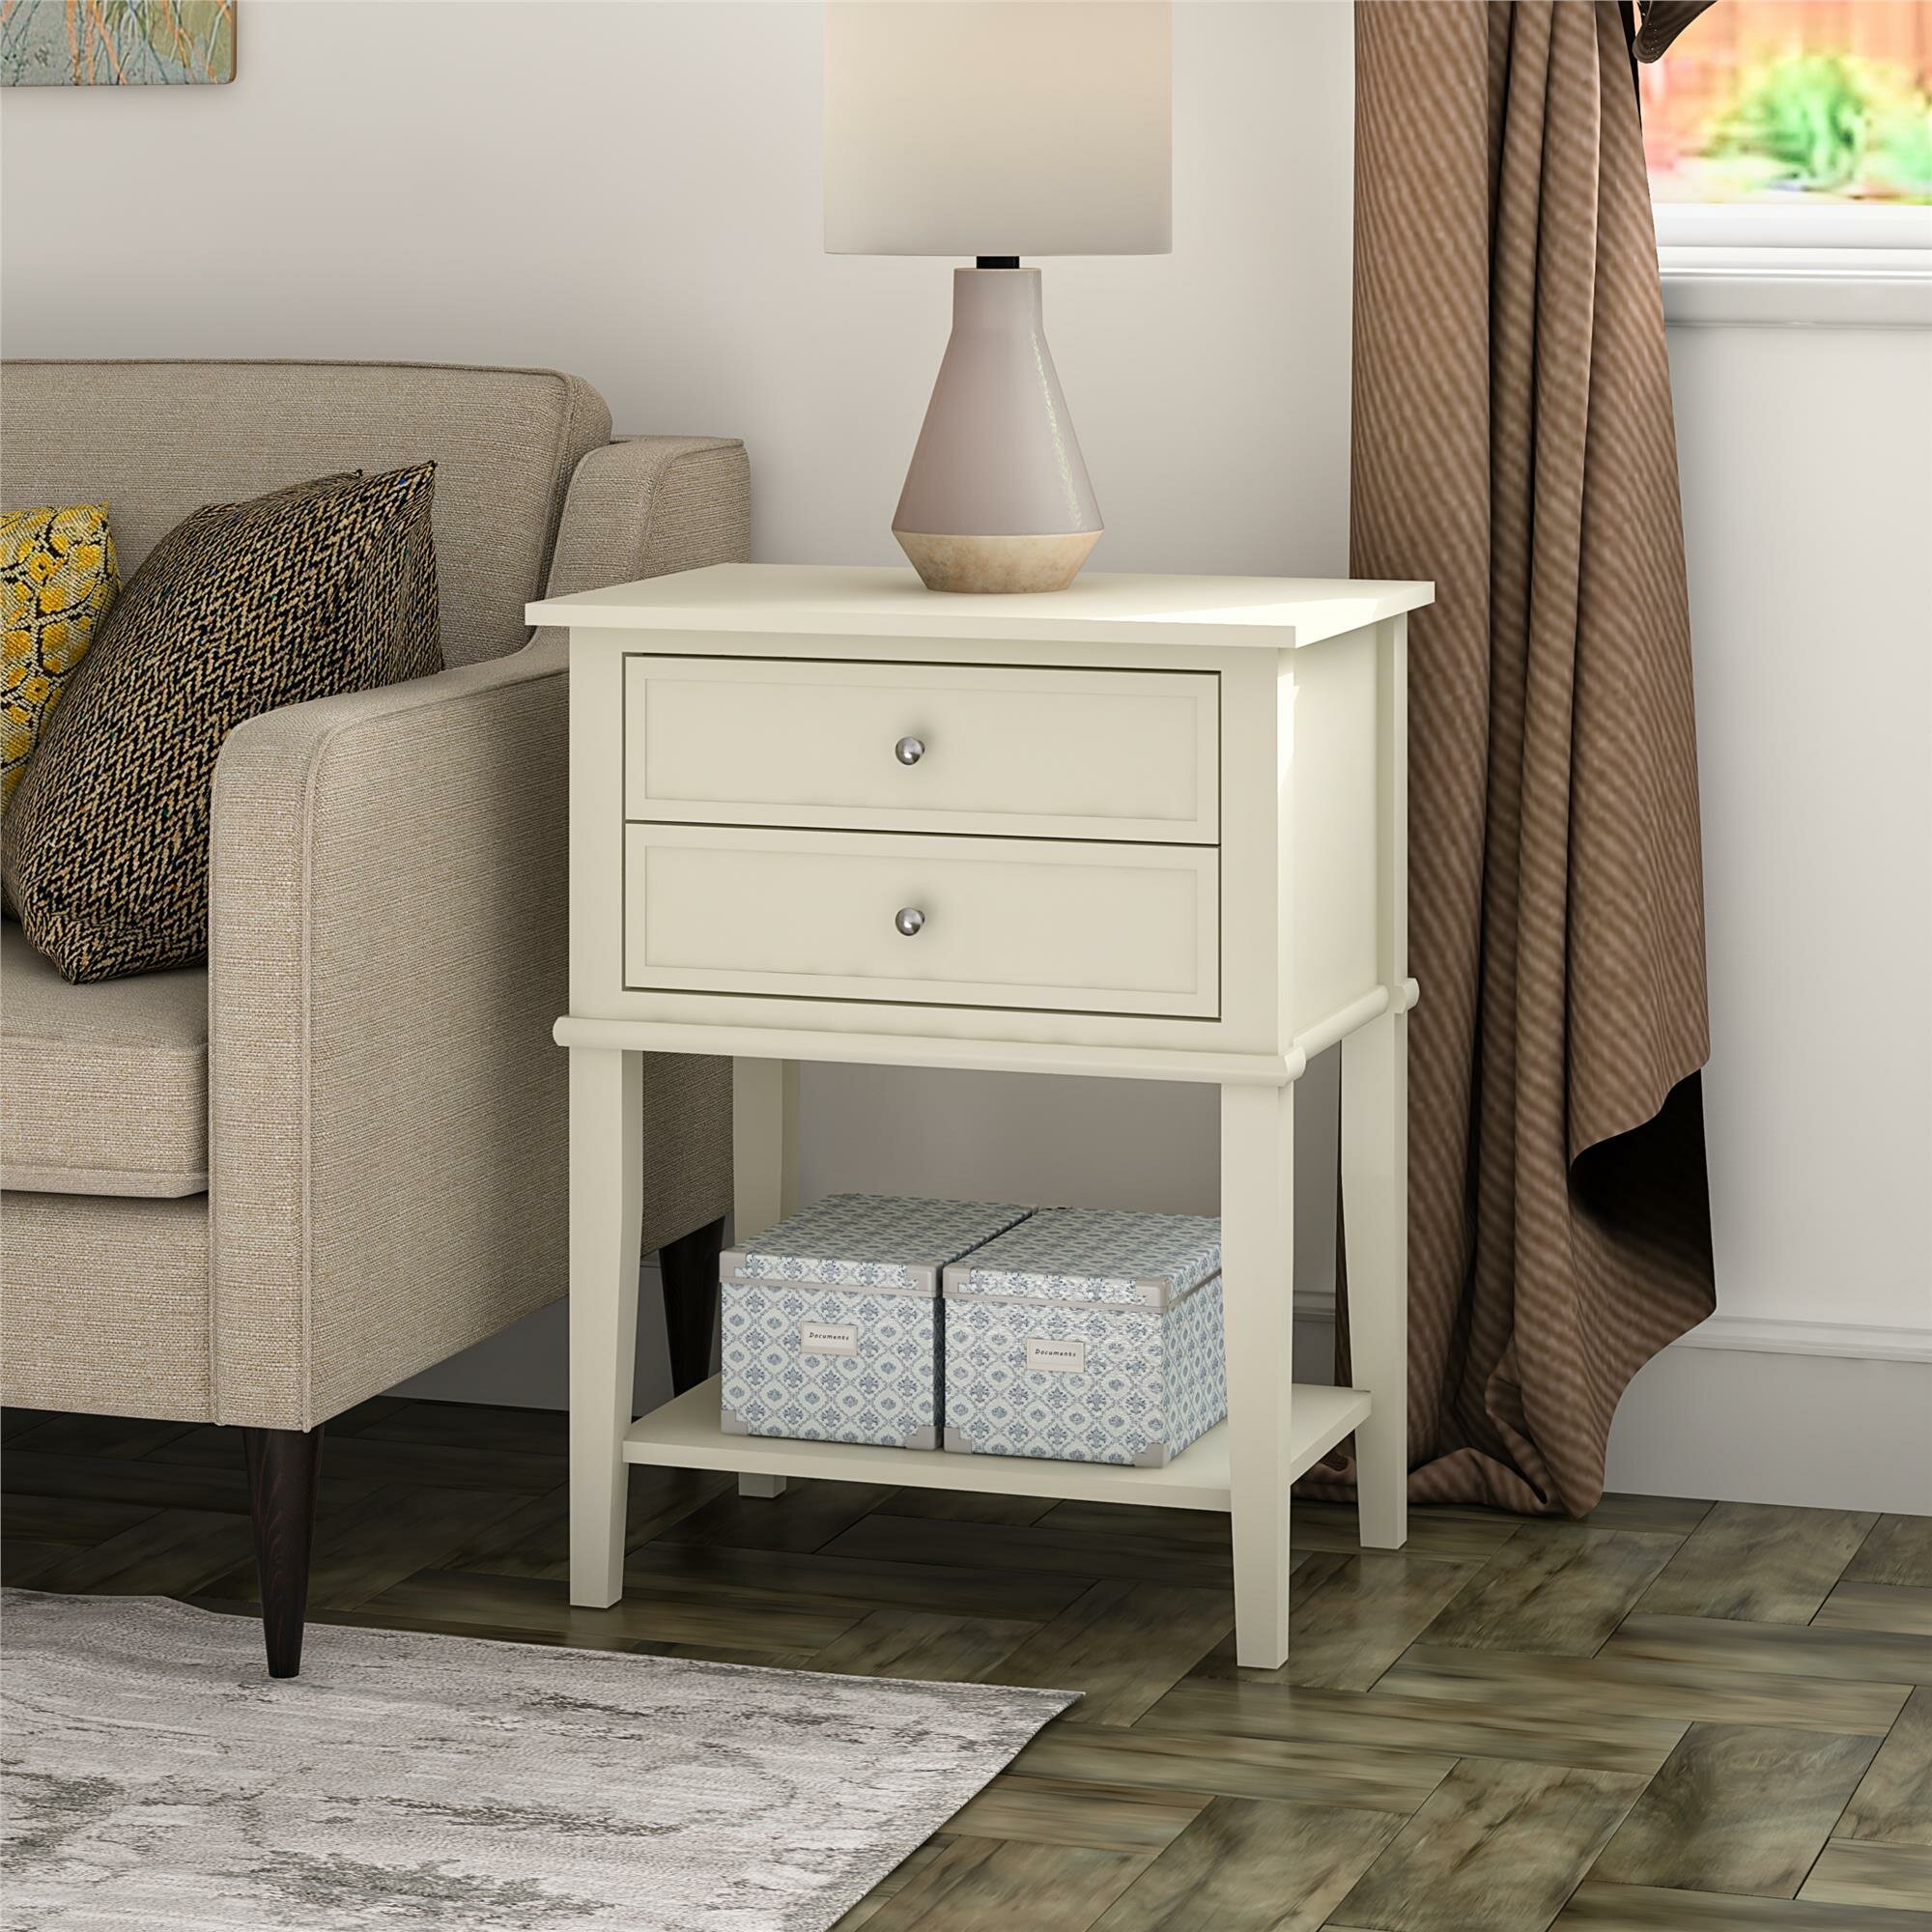 A Pair of White Wood Bedside Tables Night Stand with Storage Drawer and Basket 